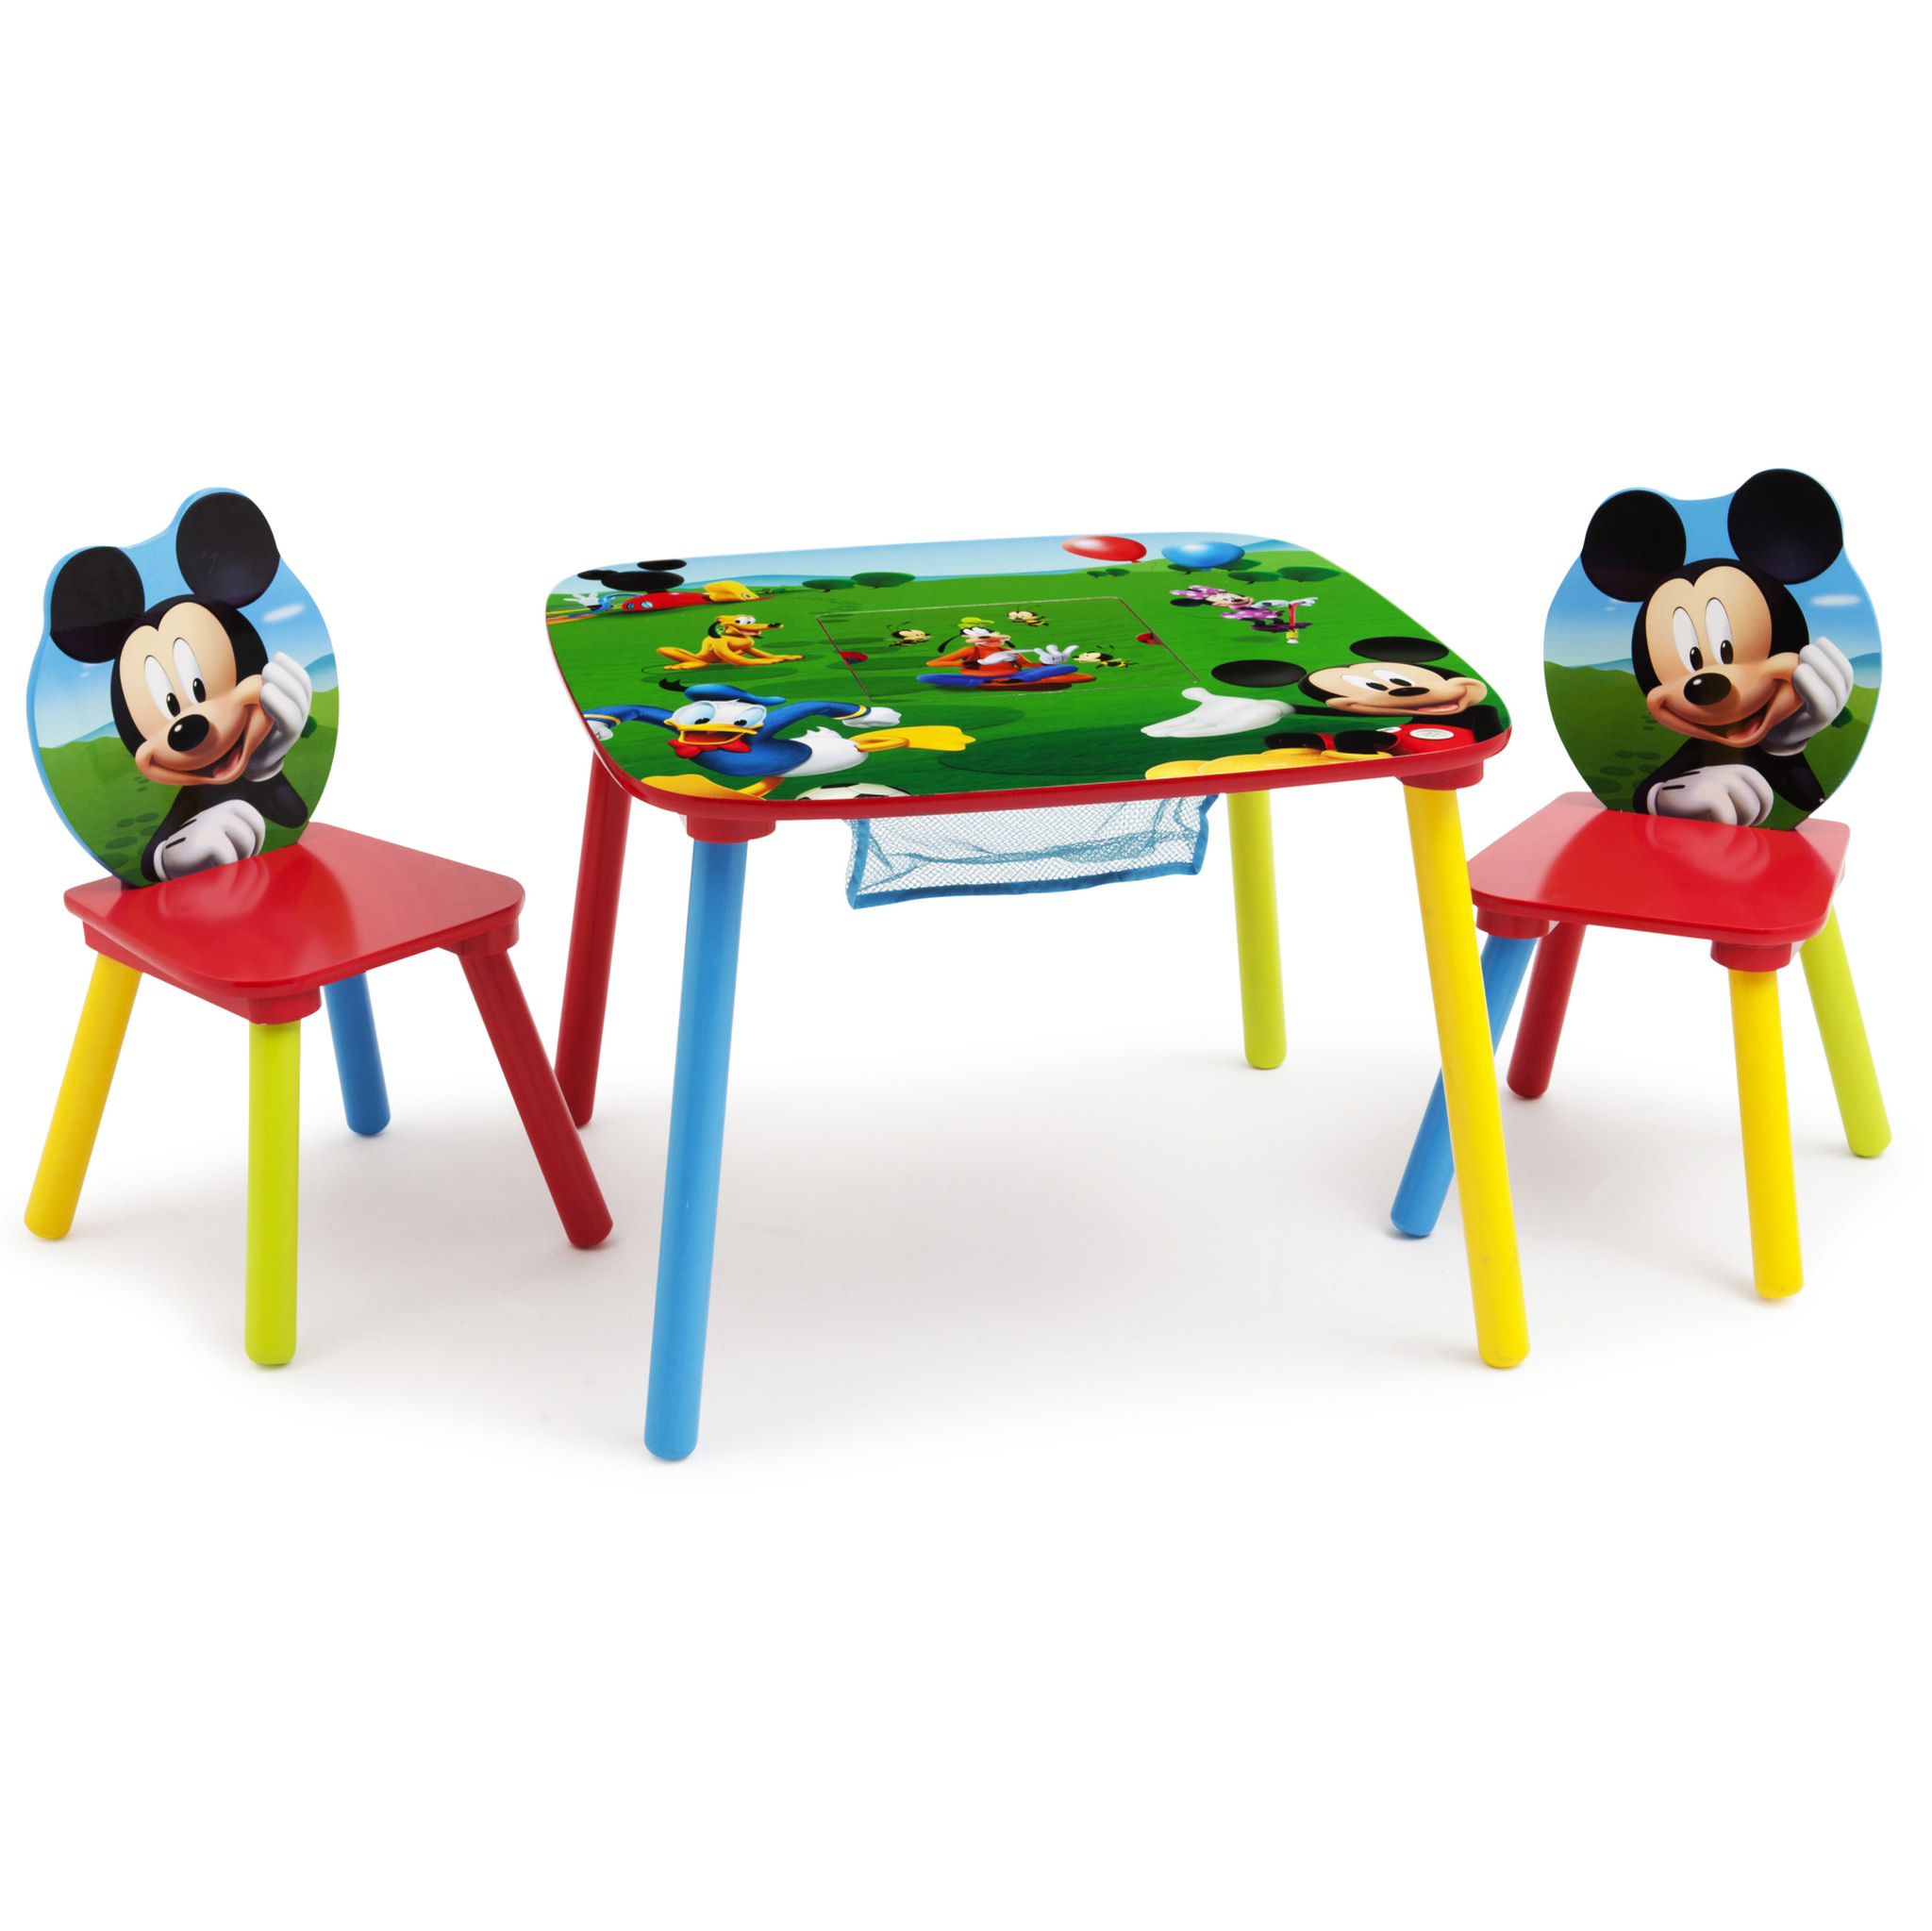 Disney Mickey Mouse Wood Kids Storage Table and Chairs Set by Delta Children - image 1 of 5